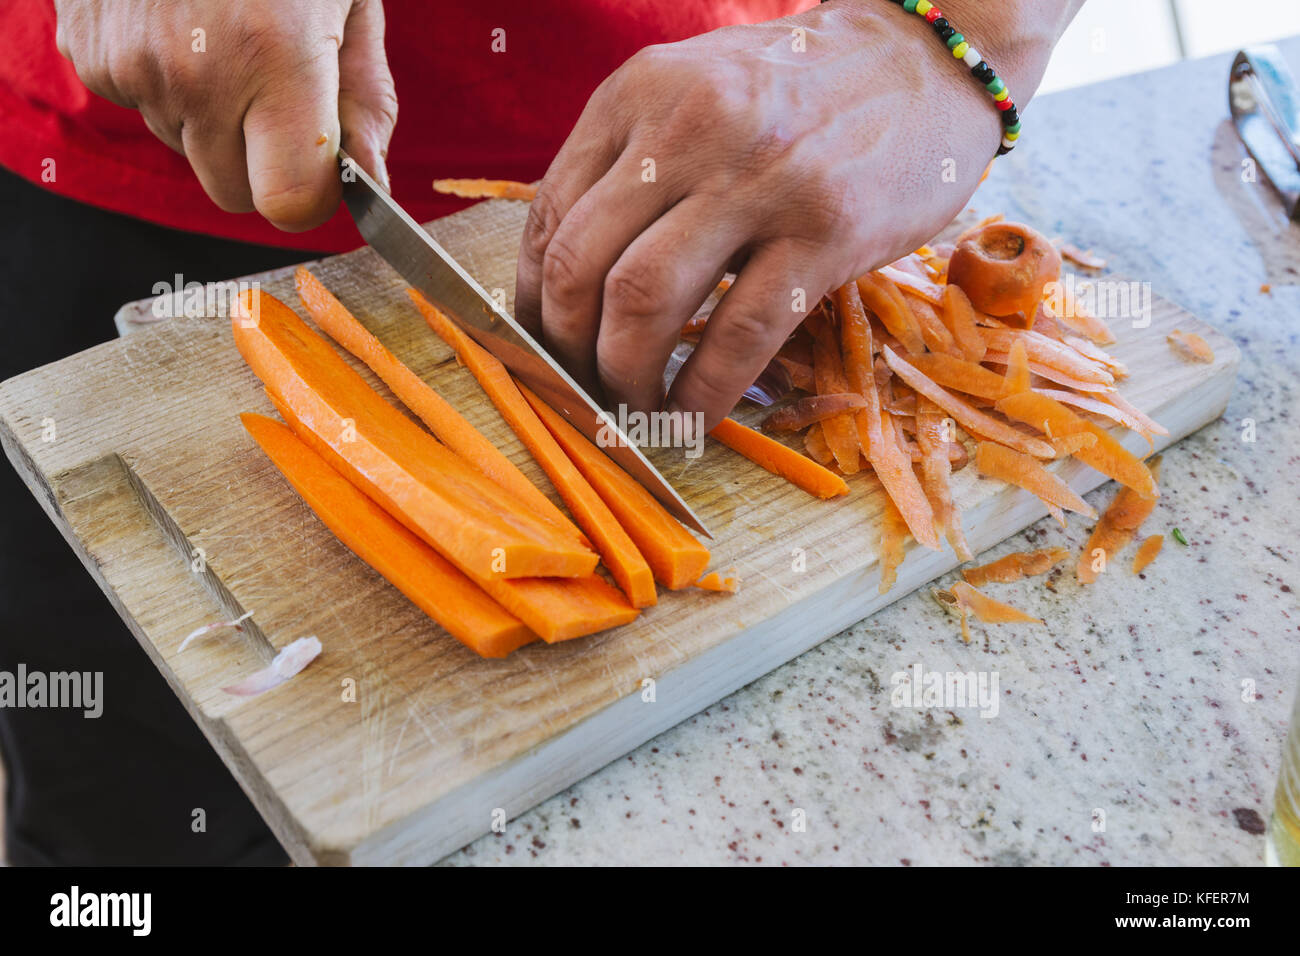 man cooking, cut carrot julienne style, in the kitchen Stock Photo